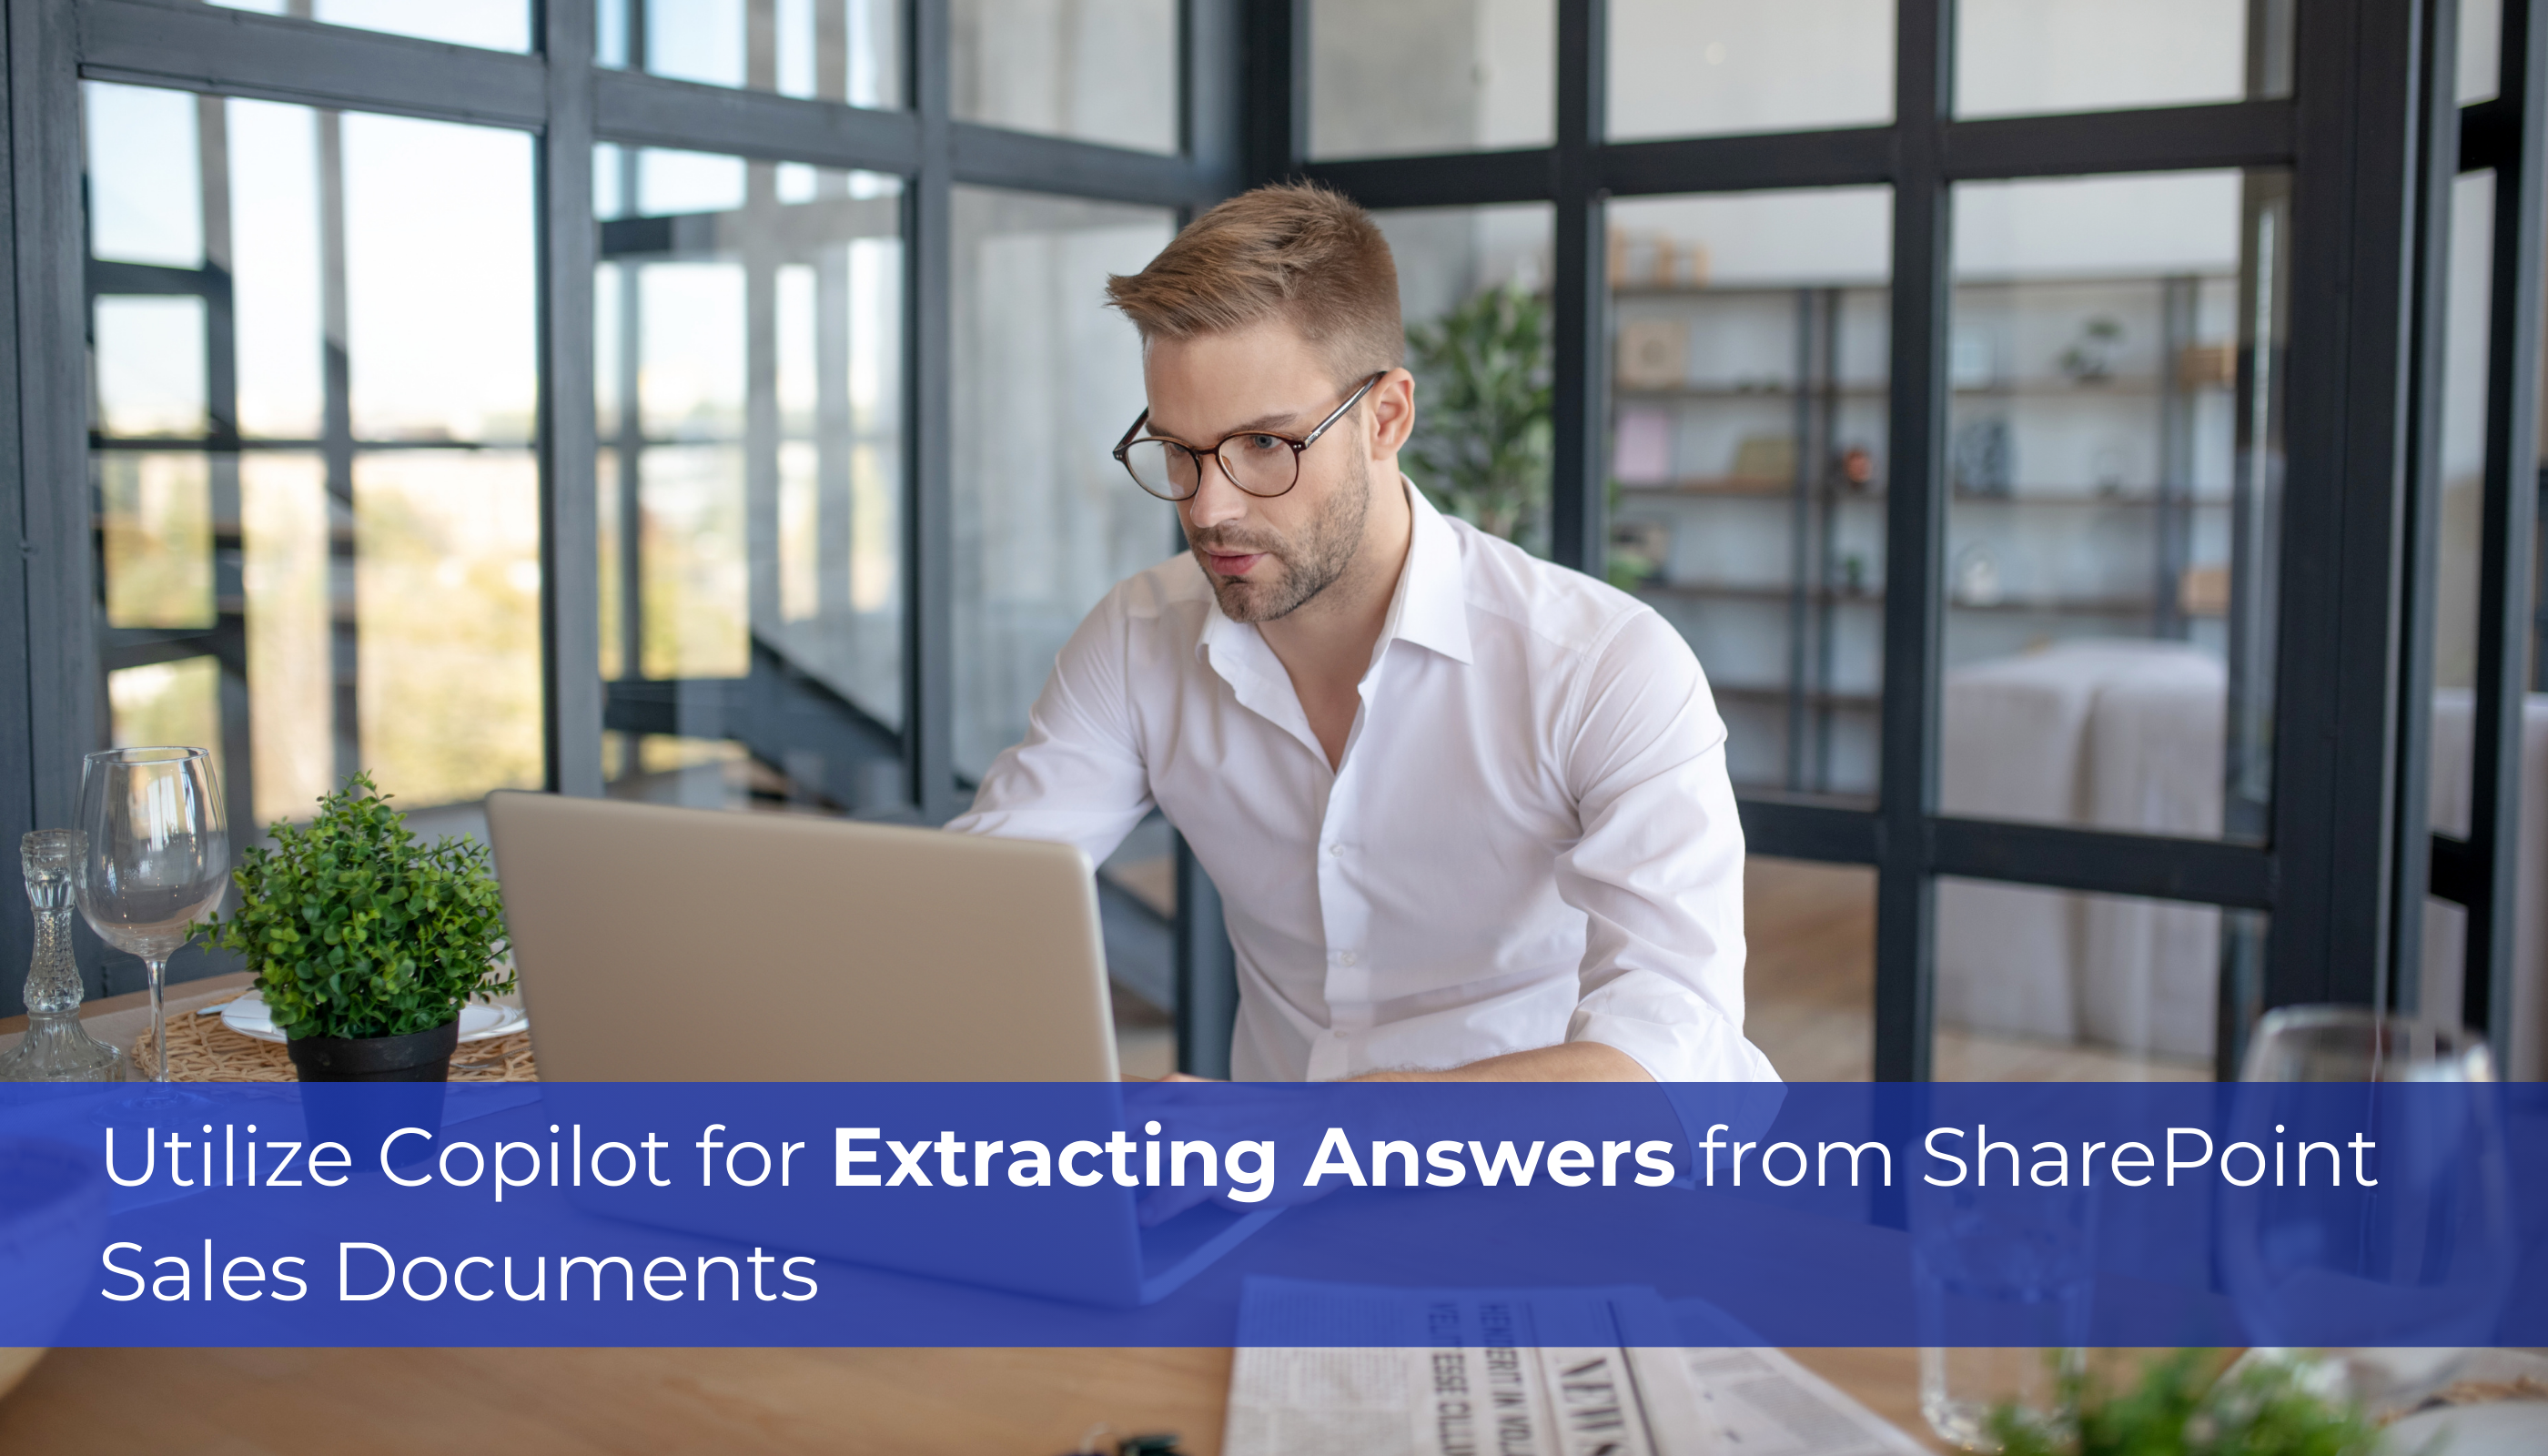 Utilize Copilot for Extracting Answers from SharePoint Sales Documents